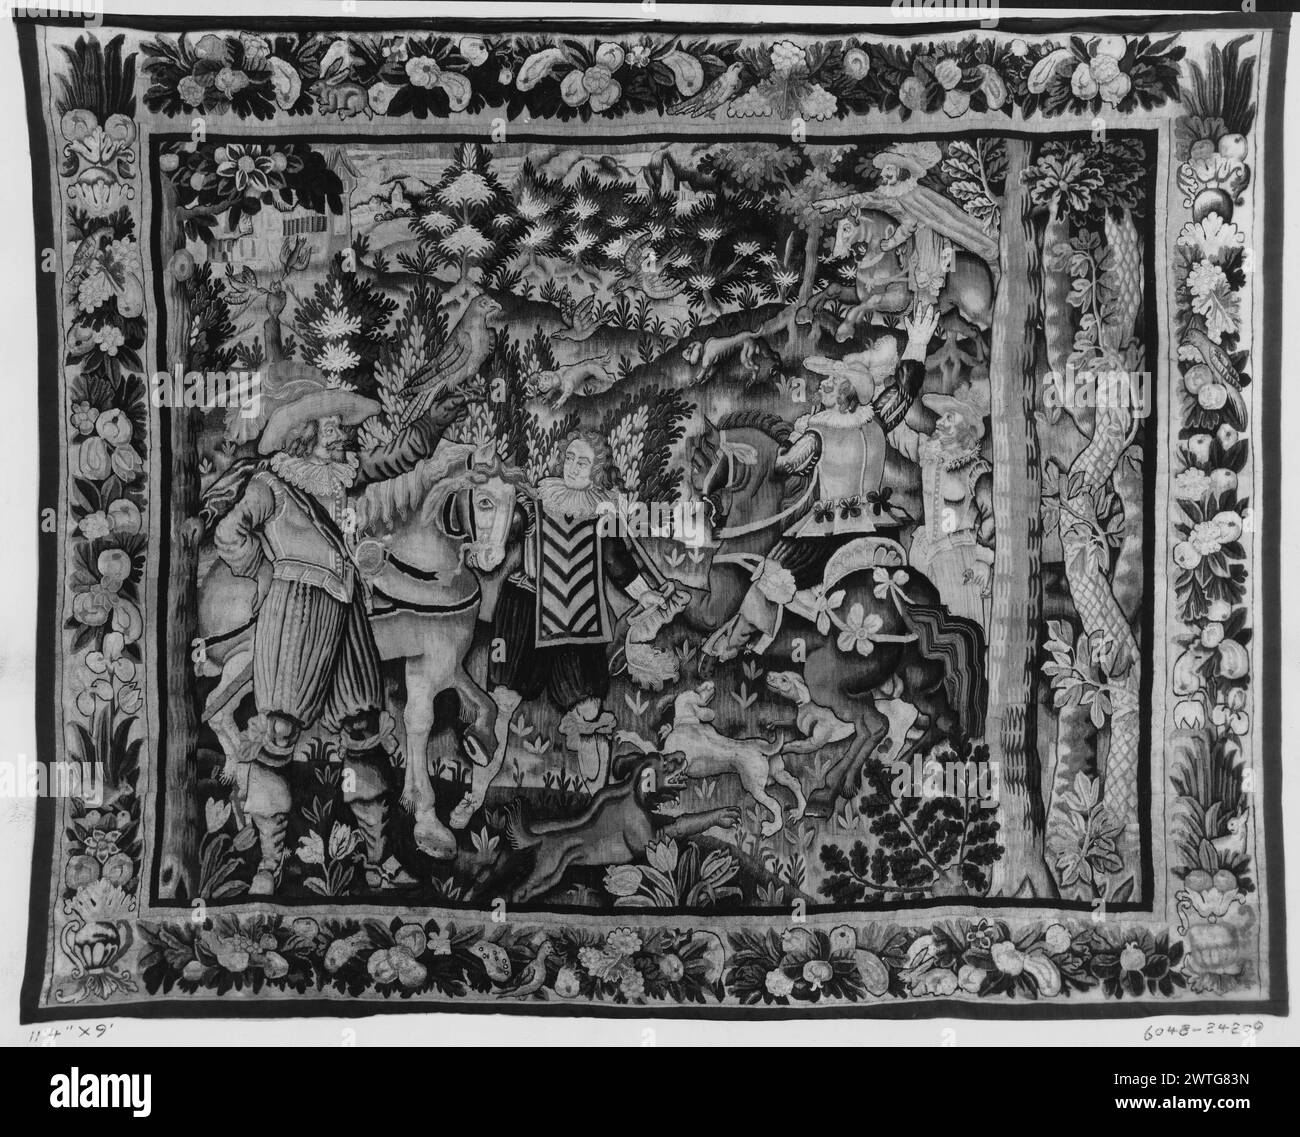 Landscape with gentlemen hawking. unknown c. 1625-1650 Tapestry Dimensions: H 9' x W 11'4' Tapestry Materials/Techniques: unknown Culture: French Weaving Center: Aubusson Ownership History: French & Co. purchased from J. T. Pratt, received 2/17/1922 (written in pen: 10/9/1929); sold to Henri Van Hove 3/31/1956. In landscape with fruit trees & flowering plants, elegantly dressed horsemen hawking with pack of hound dogs (R); falconer dismounted with bird on his arm & next to groom holding horse (L); building in distance (BRD) garland of fruit with flowers & acanthus leaves, interspersed with bir Stock Photo